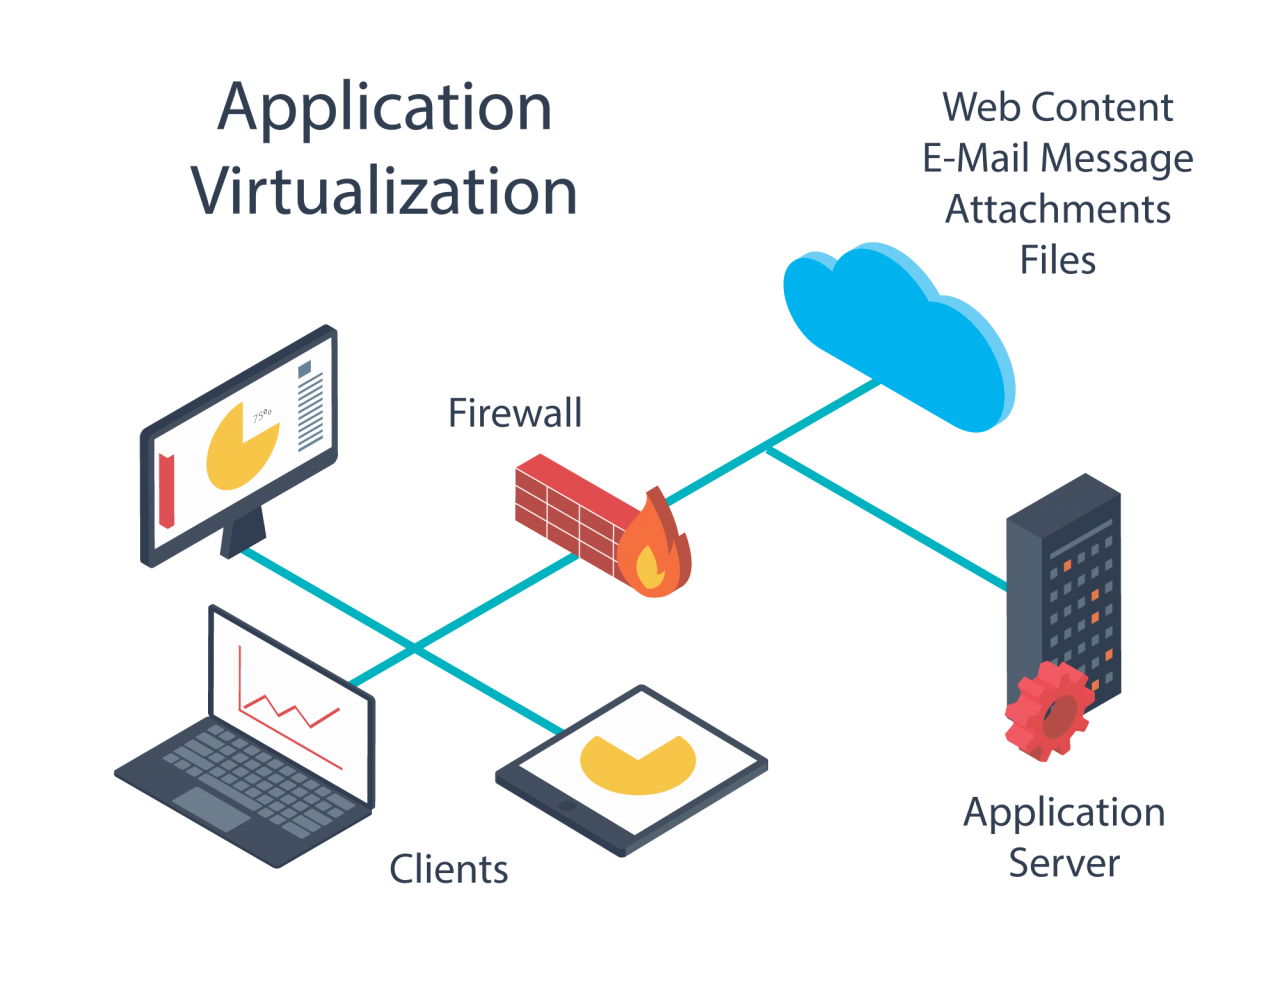 A diagram of cloud service virtualization shows how a virtualized application is delivered to clients through a firewall from a cloud-based server.